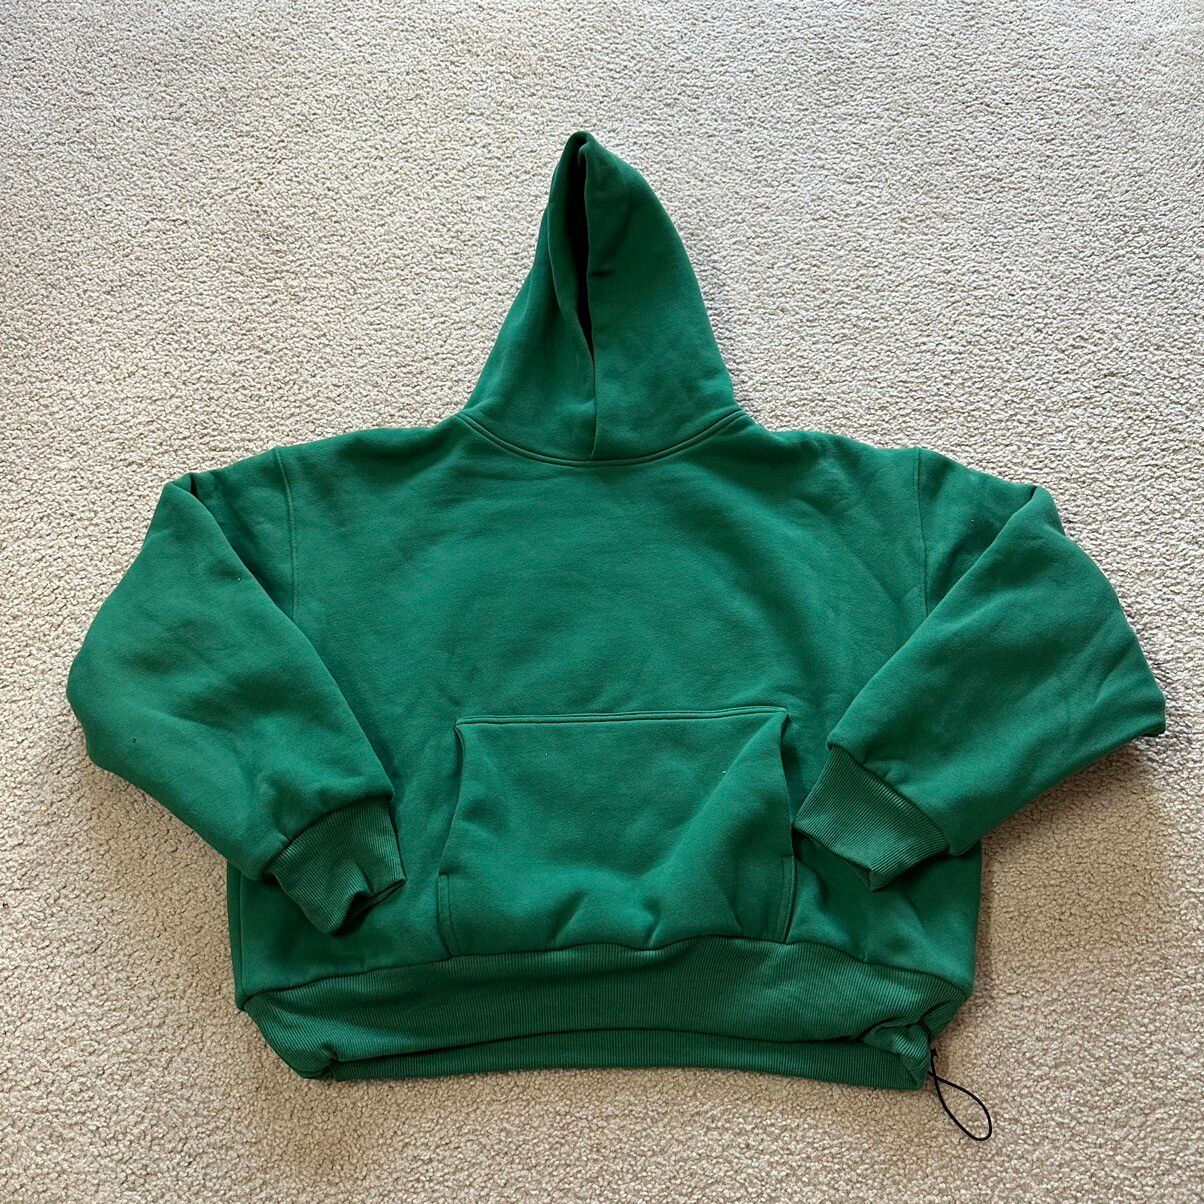 Hype Humane Blanks 1800 GSM Green Hoodie with CRDLCK Size US XL / EU 56 / 4 - 1 Preview